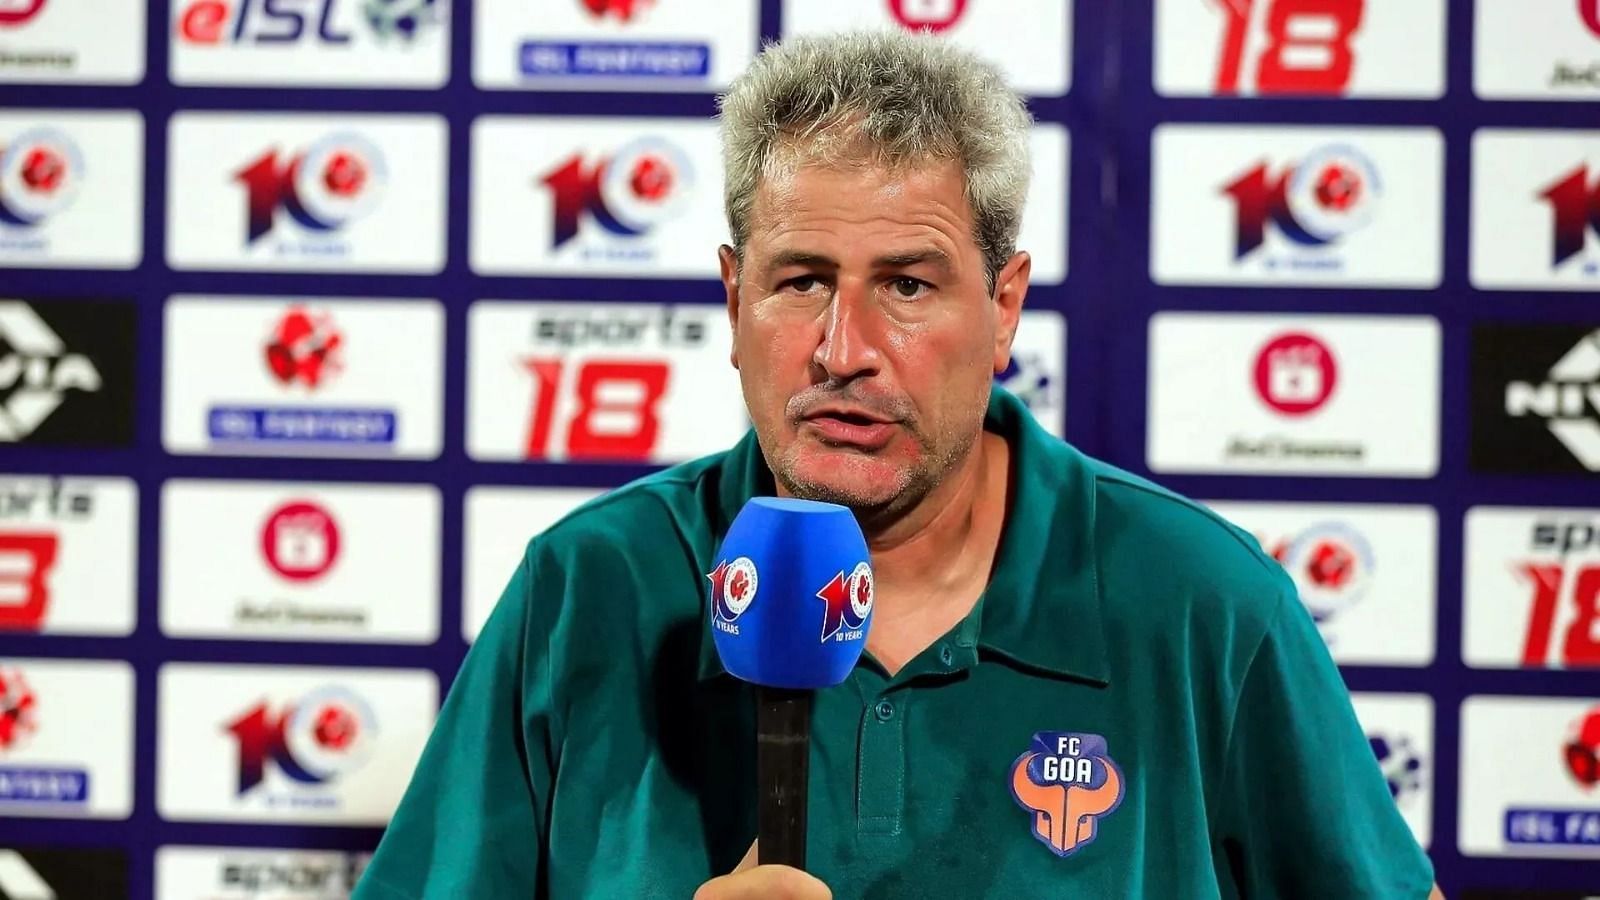 FC Goa head coach Manolo Marquez wants his team to come back stronger given the fact that they need to turnaround their fortunes quickly